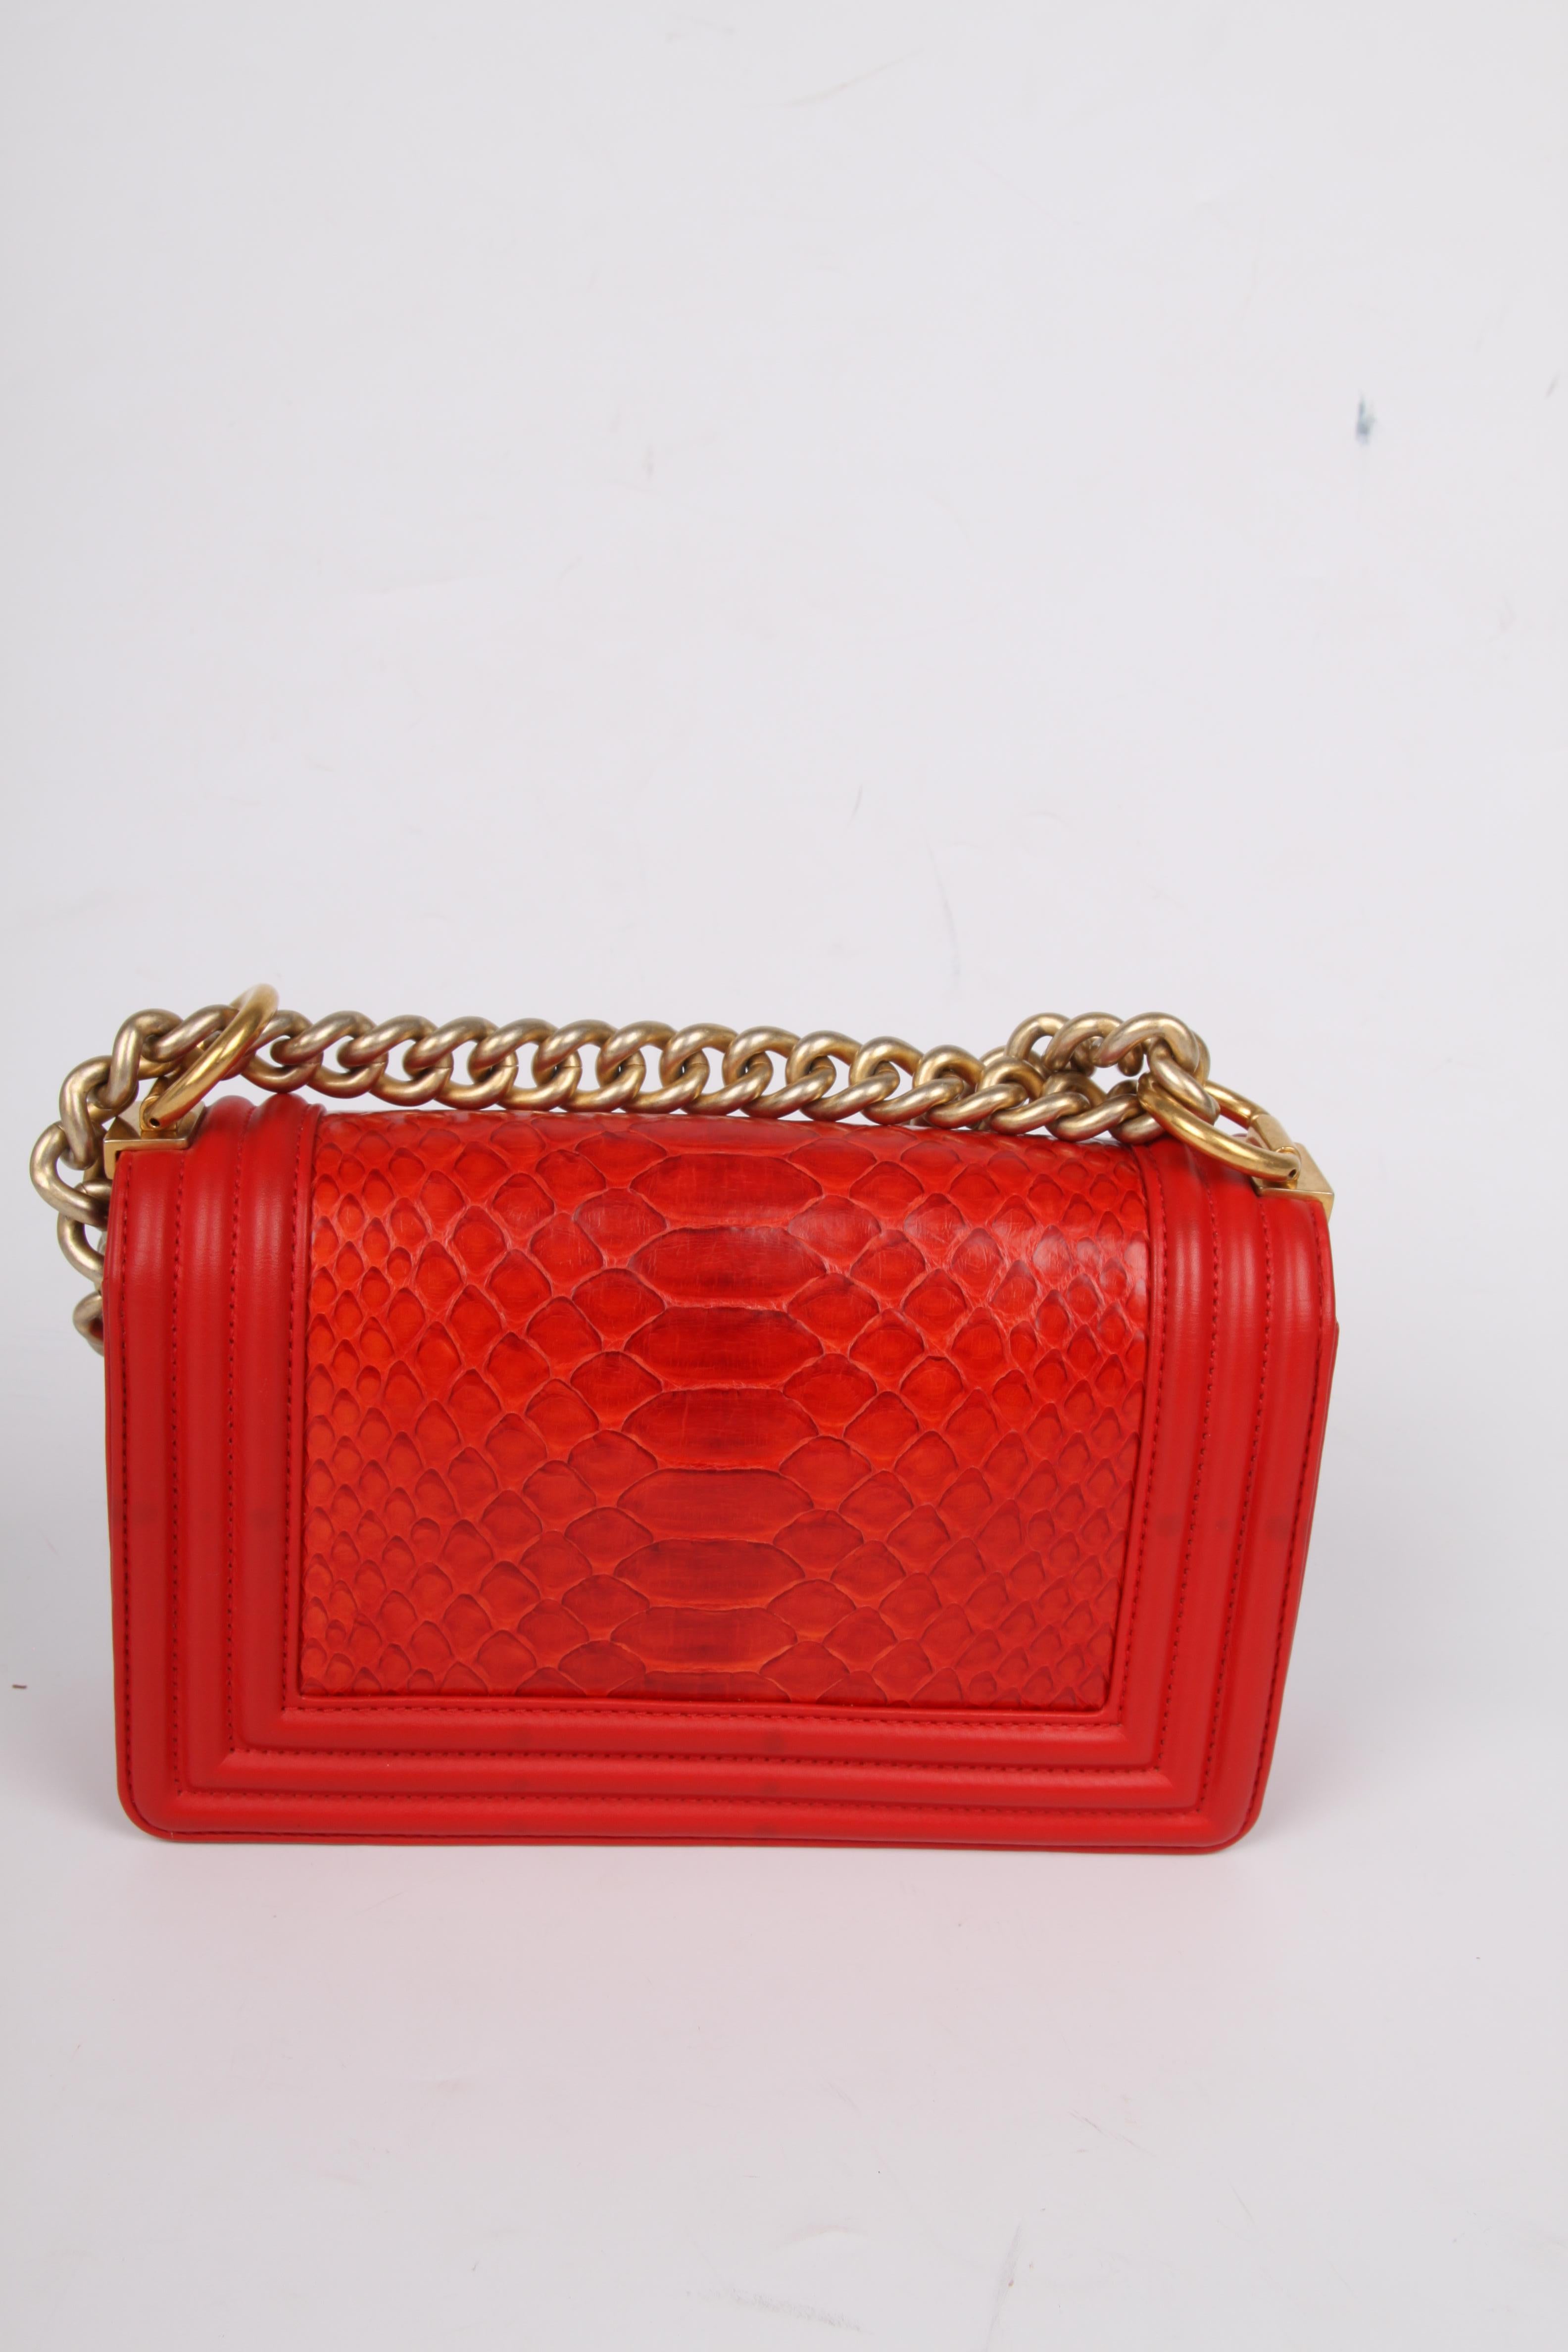 Women's or Men's   Chanel Quilted Lambskin & Python Le Boy Bag Mini - red   